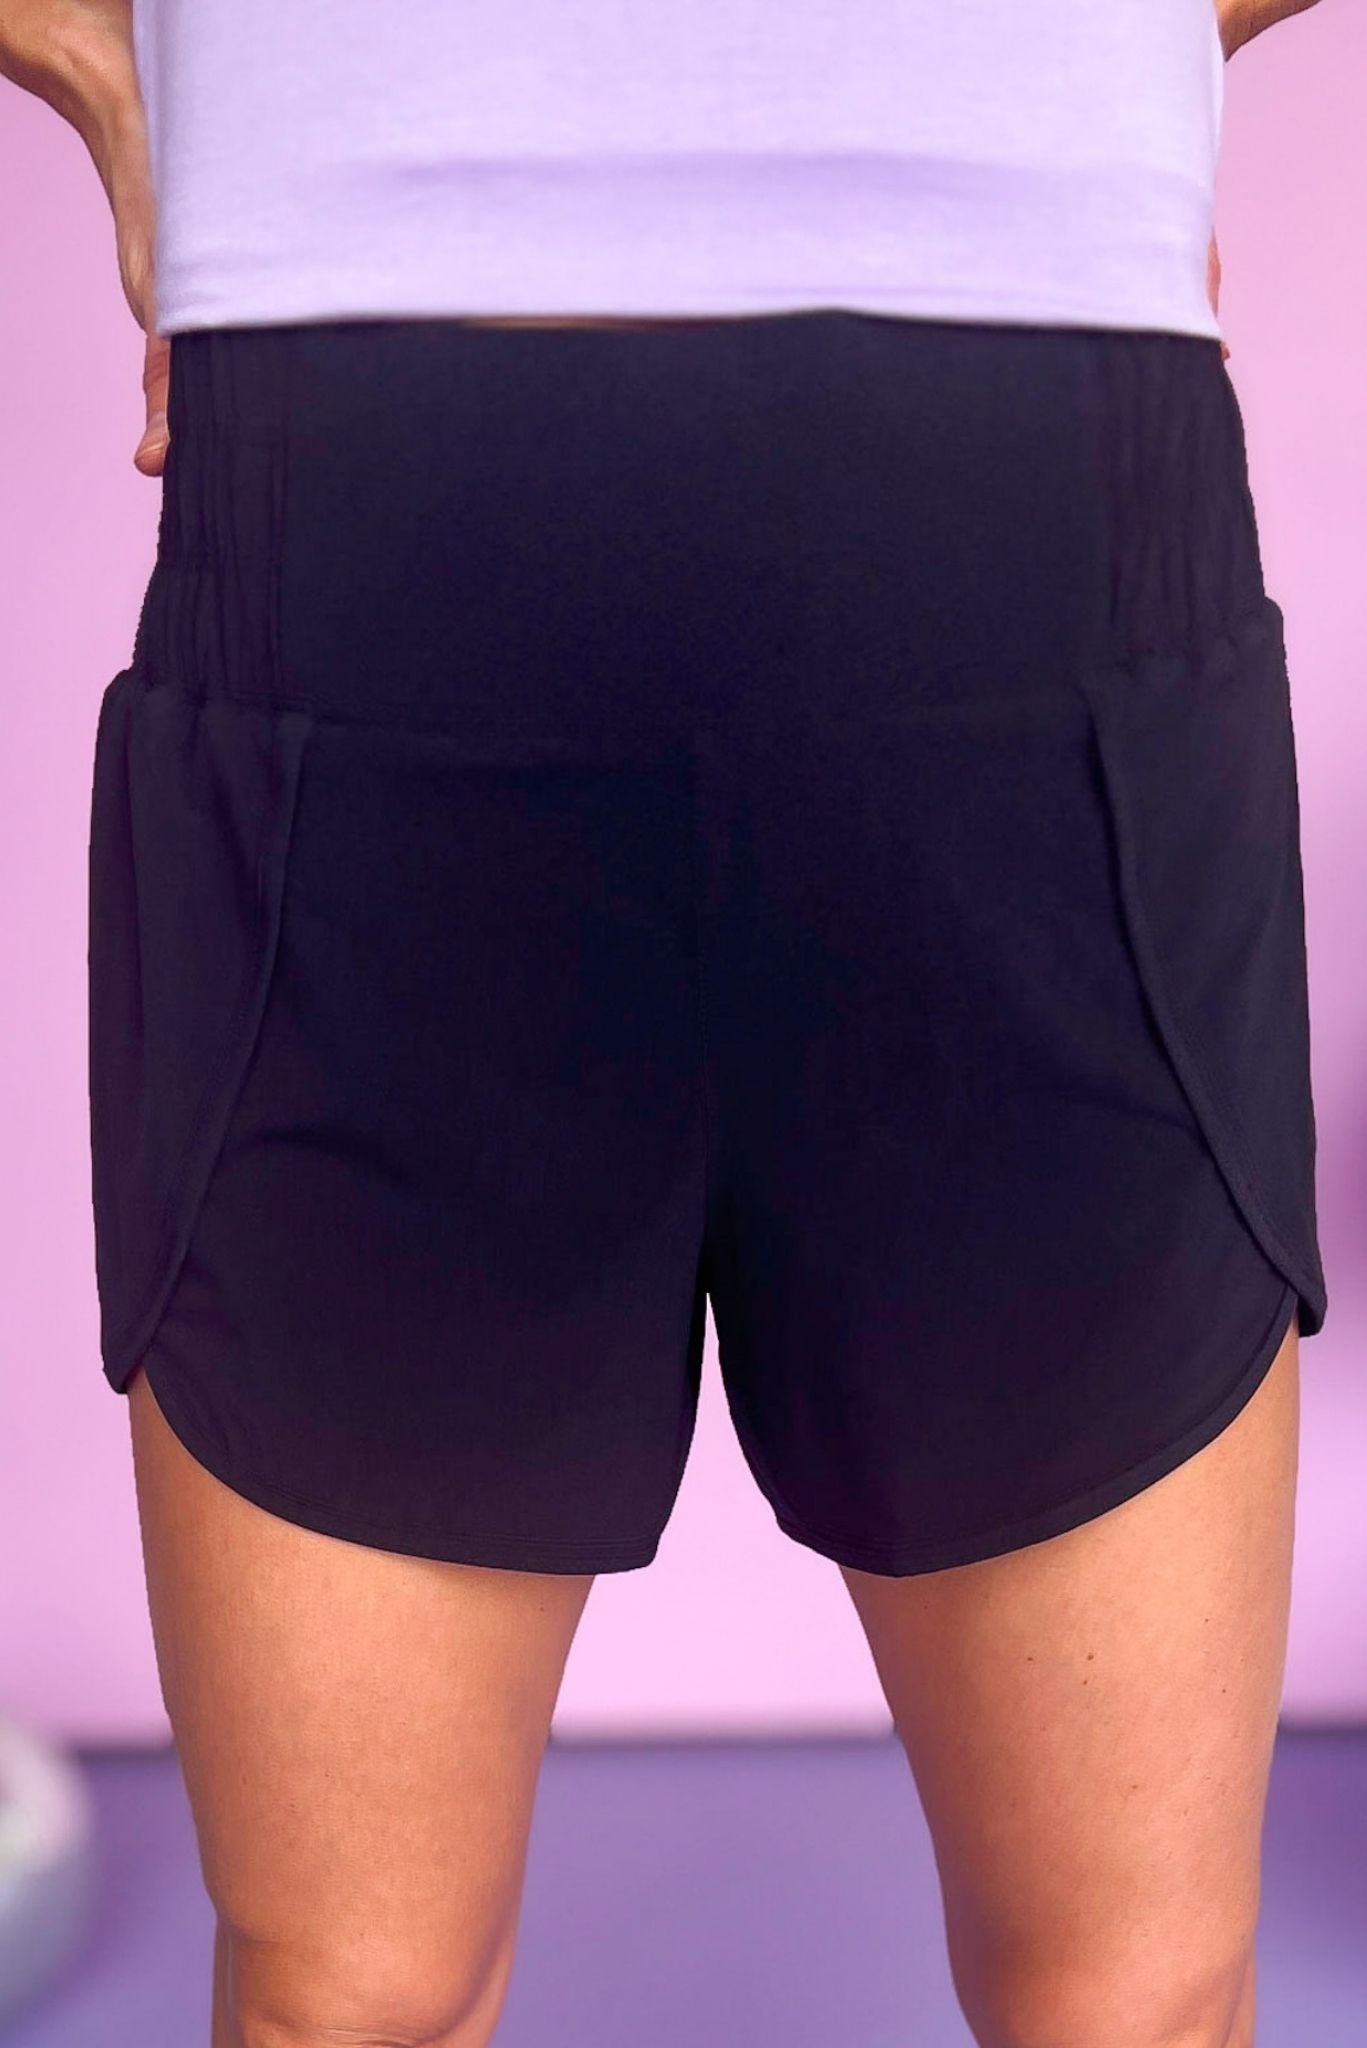 Black Ruched Waistband Split Athleisure Shorts, ruched waistband, shorts, work out, athleisure, lounge wear, running shorts, mom style, shop style your senses by mallory fitzsimmons